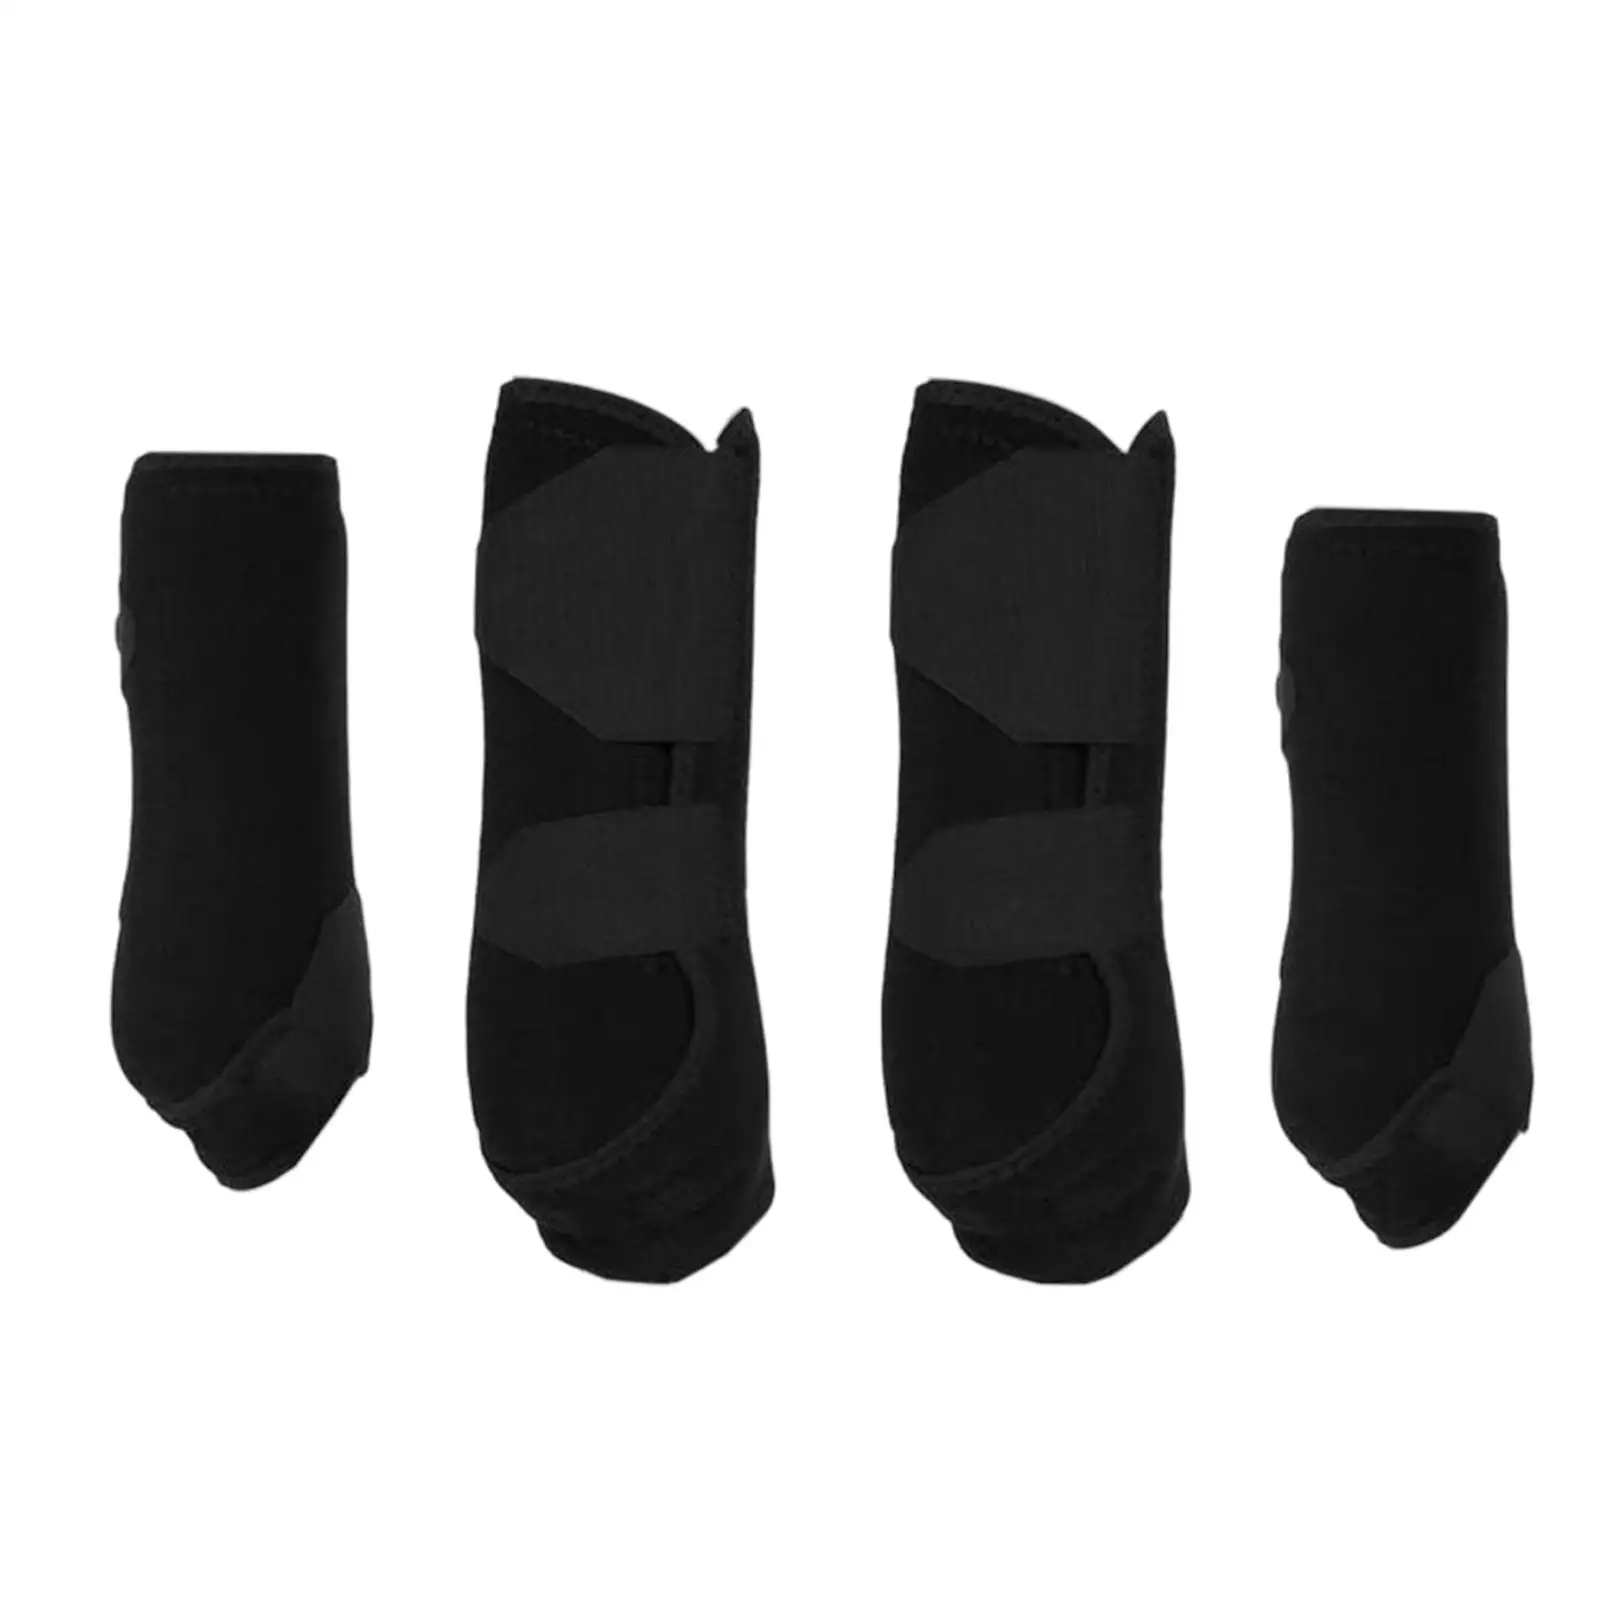 4x Horse Boots Leg Protection Wraps Protector Shock Absorbing Tendon Protection Front Hind Legs Guard for Equestrian Accessories